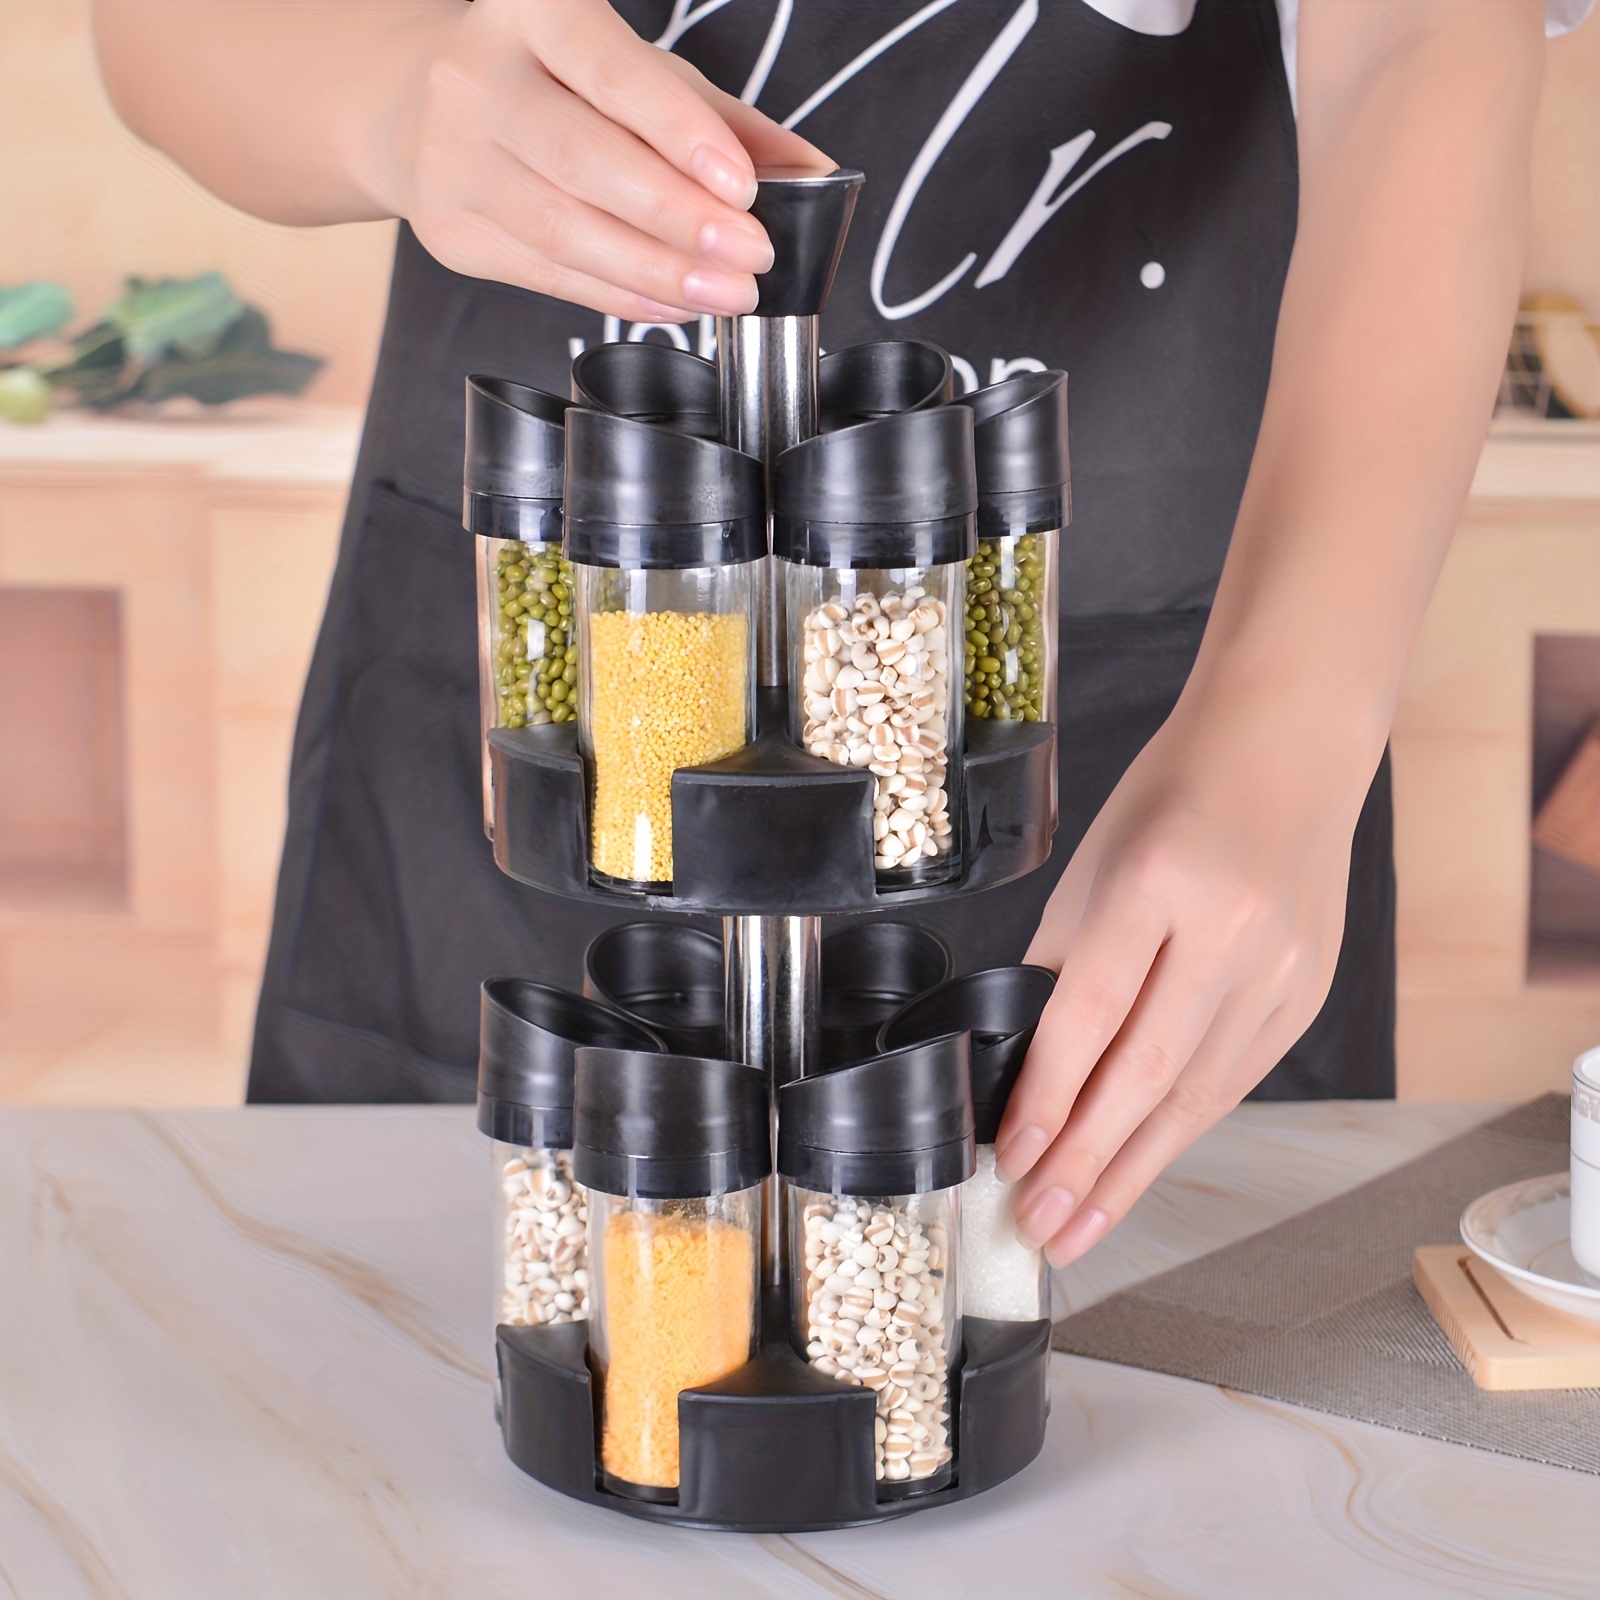 6-Jar Revolving Spice Rack, Spices and Seasonings Sets with Rack,  Countertop Seasoning Organizer Spice Pots Storage Container